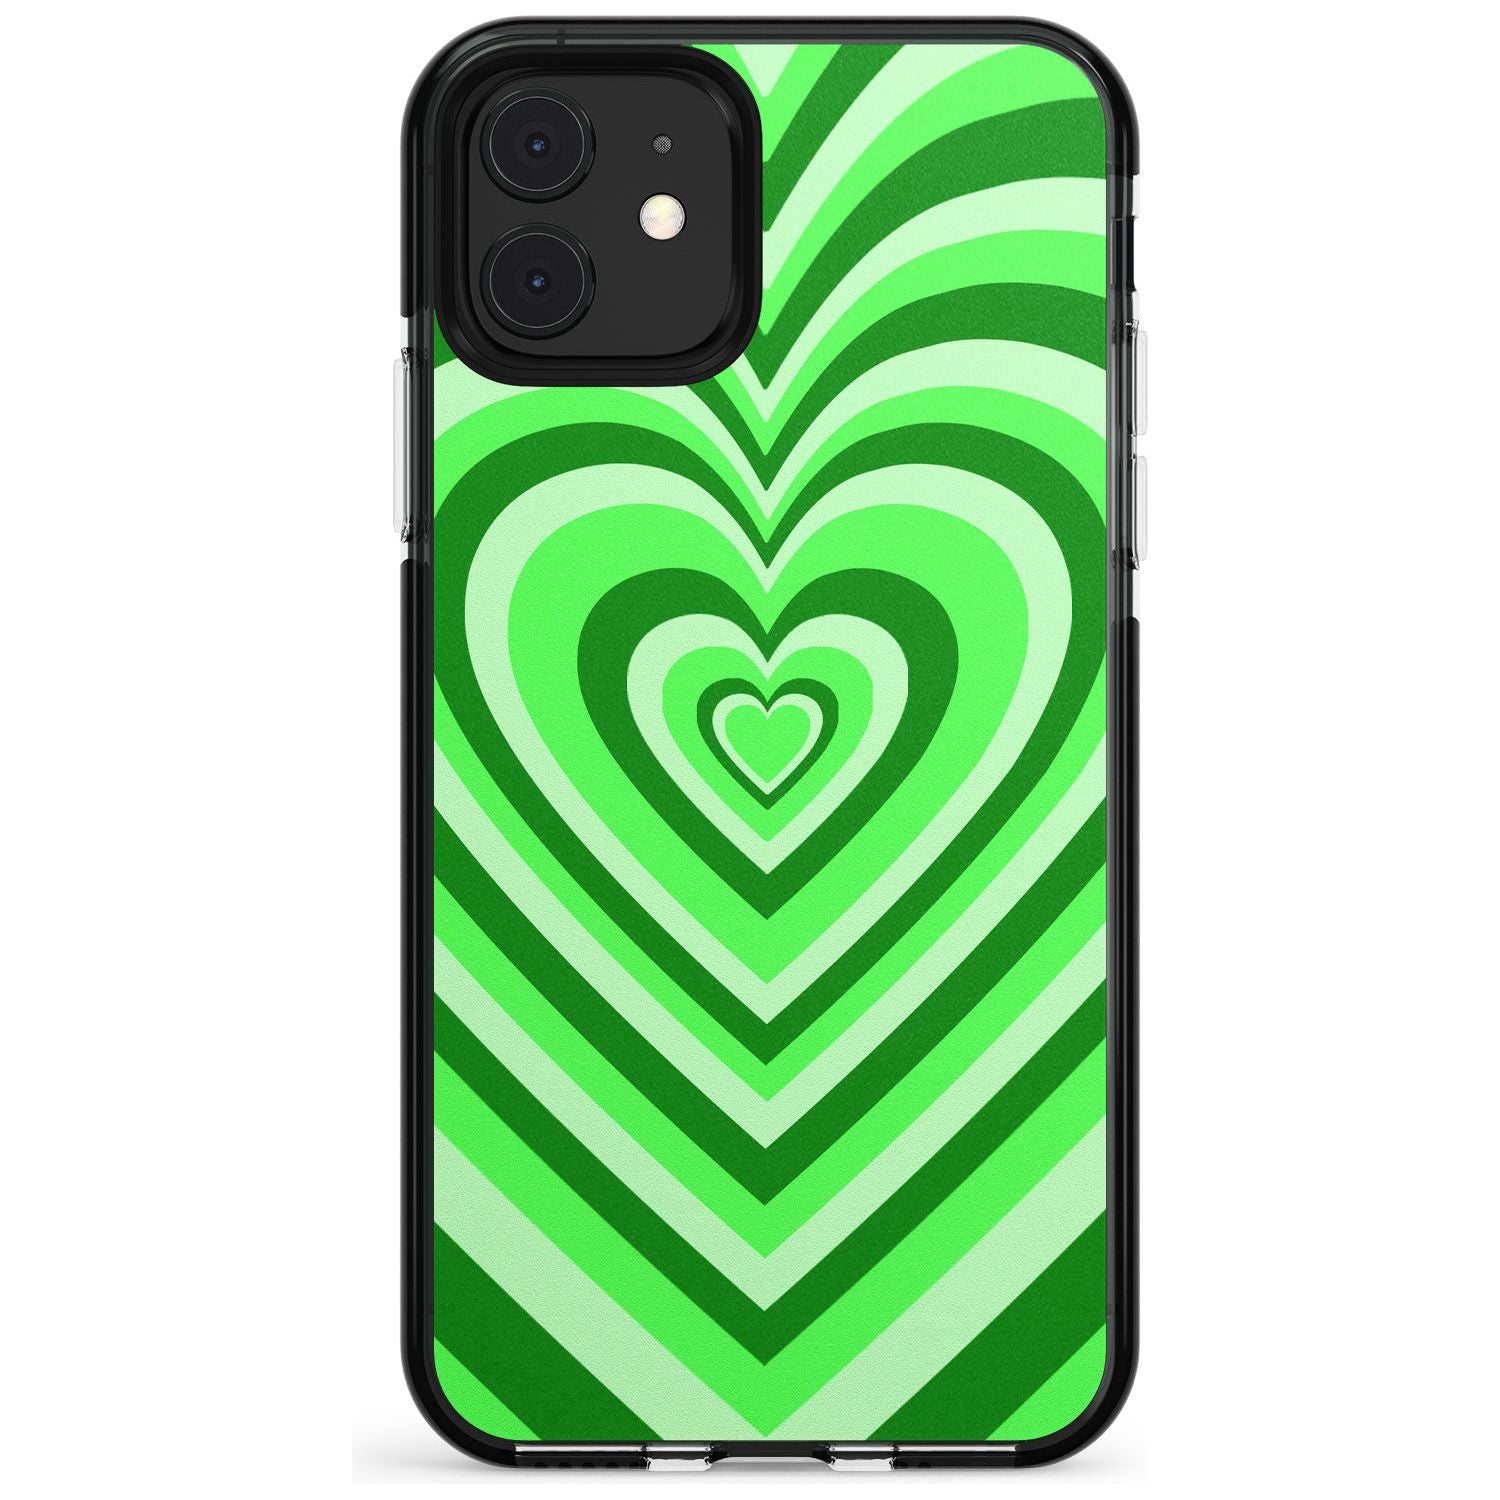 Green Heart Illusion Black Impact Phone Case for iPhone 11 Pro Max